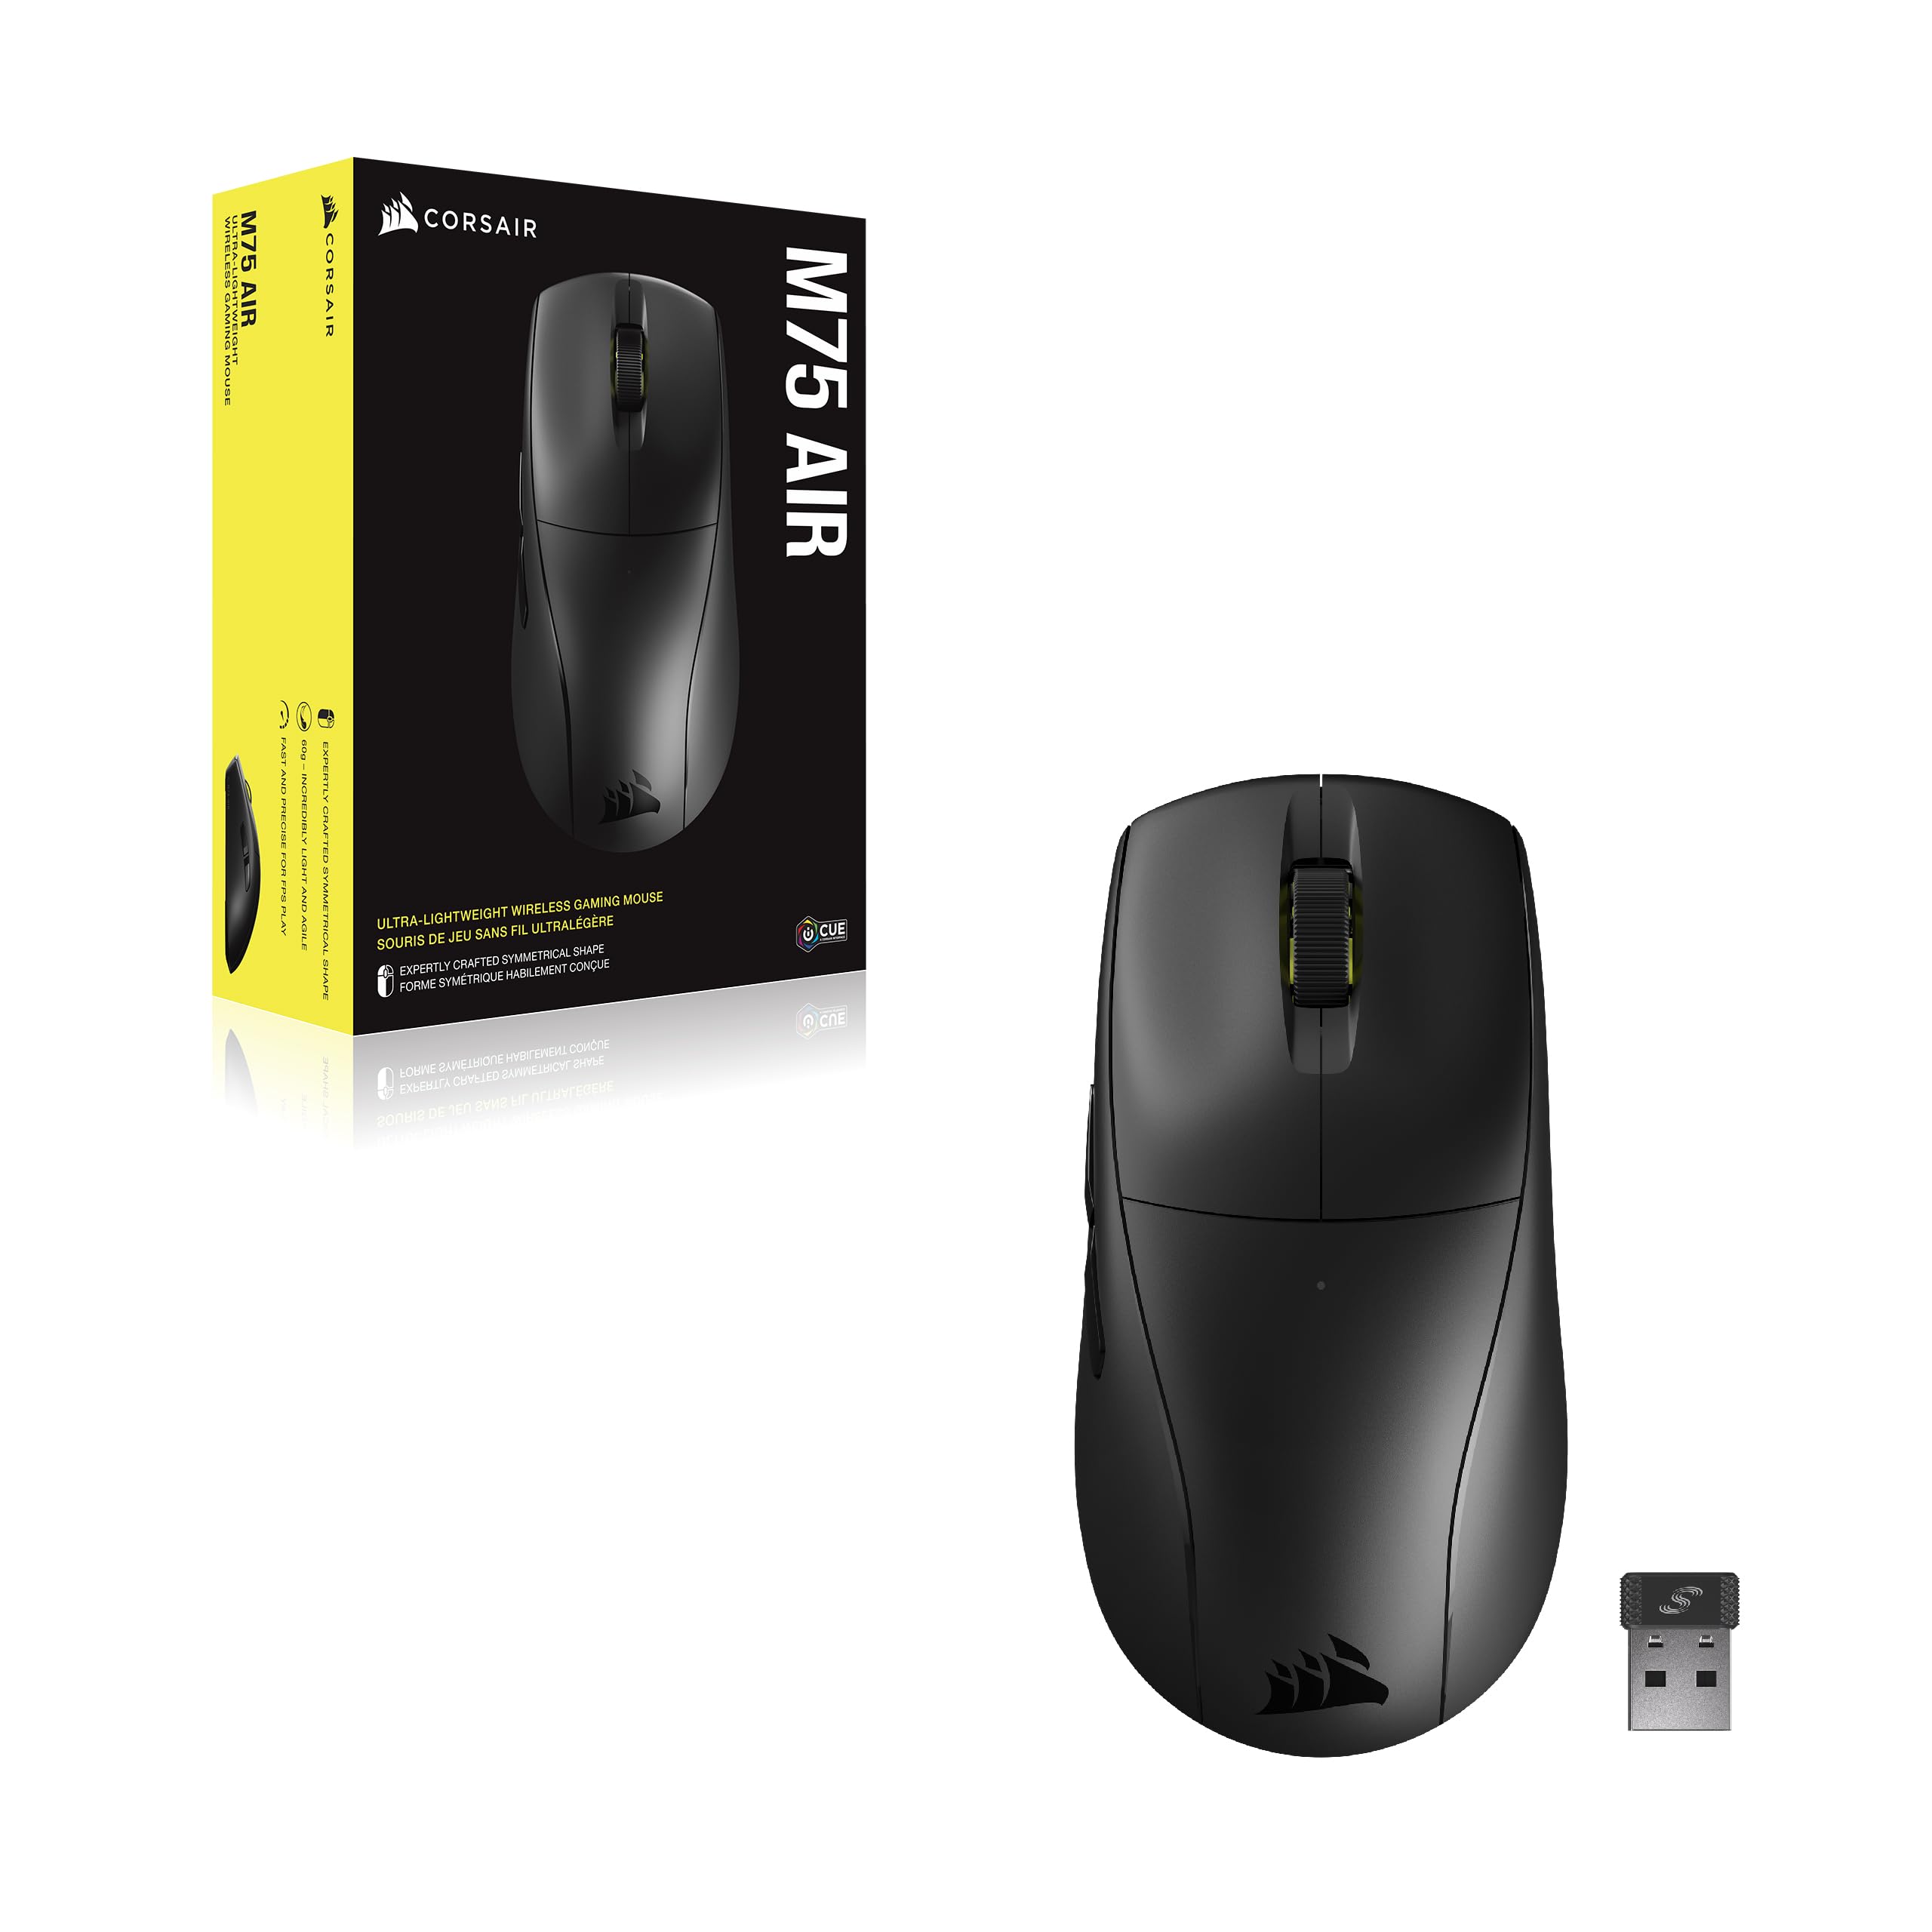 Corsair M75 AIR Wireless Ultra Lightweight Gaming Mouse (Various Colors) $70 + Free Shipping